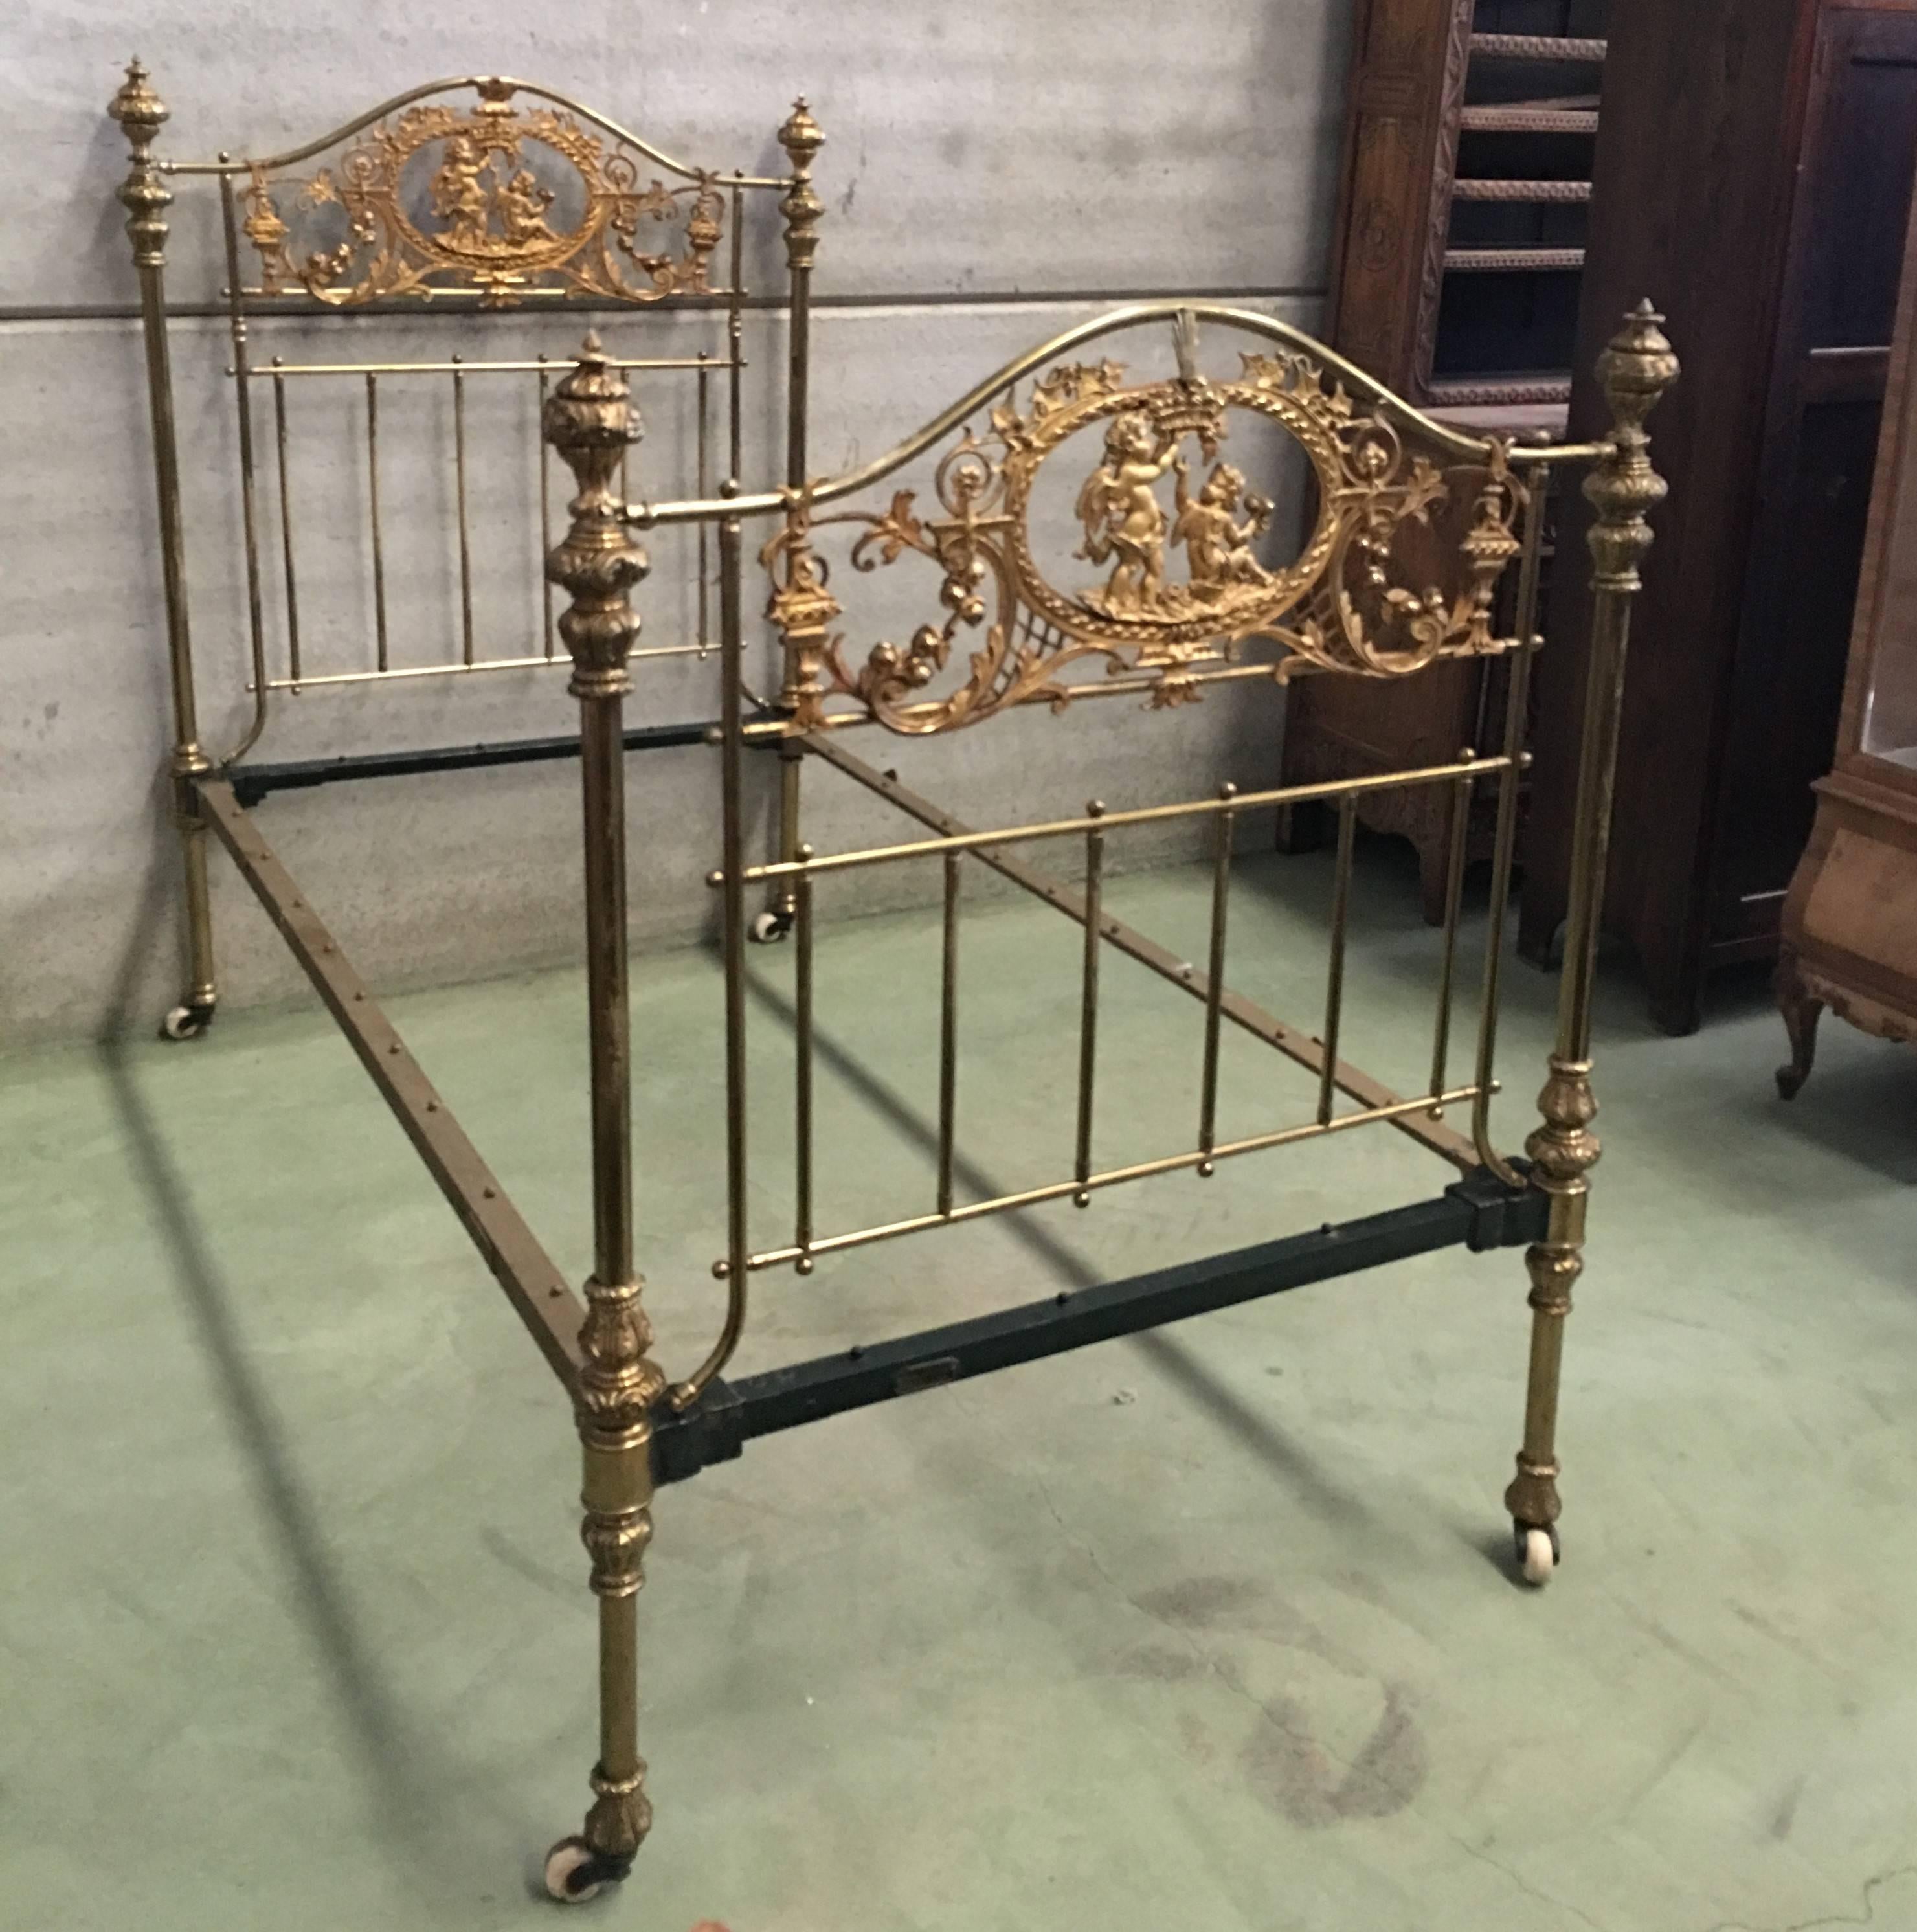 19th century English bronze and brass twin extra large bed with cherubs.
It has wheels.
Signed by Peyton & Peyton, Birminghan, London.
Really beautiful.

For matress twin extra large 38